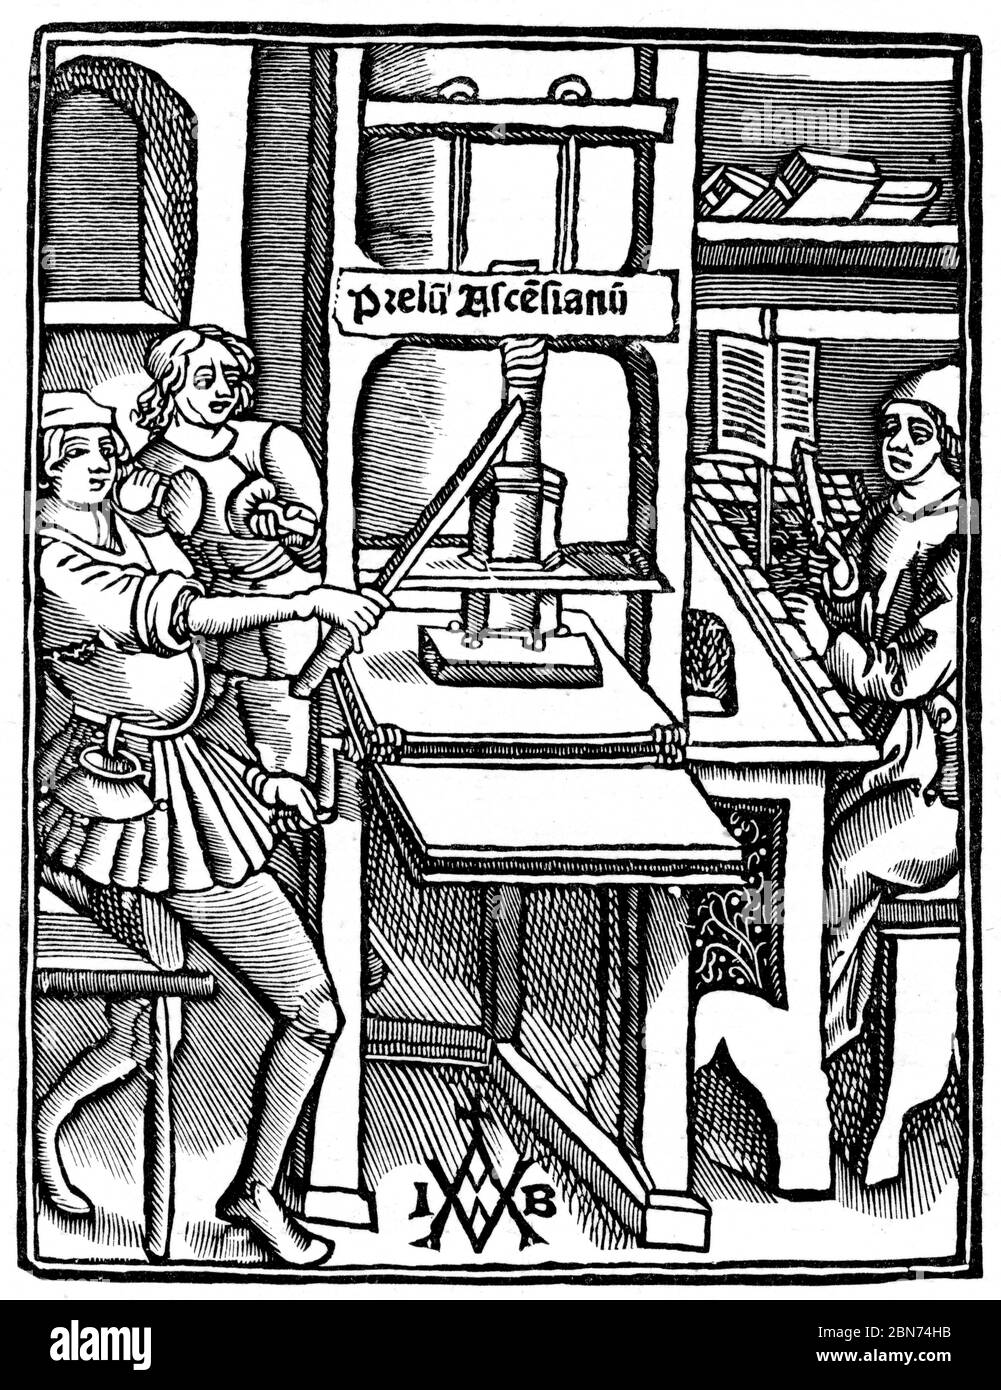 Printing press, 1511. From the title page of 'Hegesippus'. Printed by Jodocus Badius (1462-1535), Paris, 1511. Stock Photo